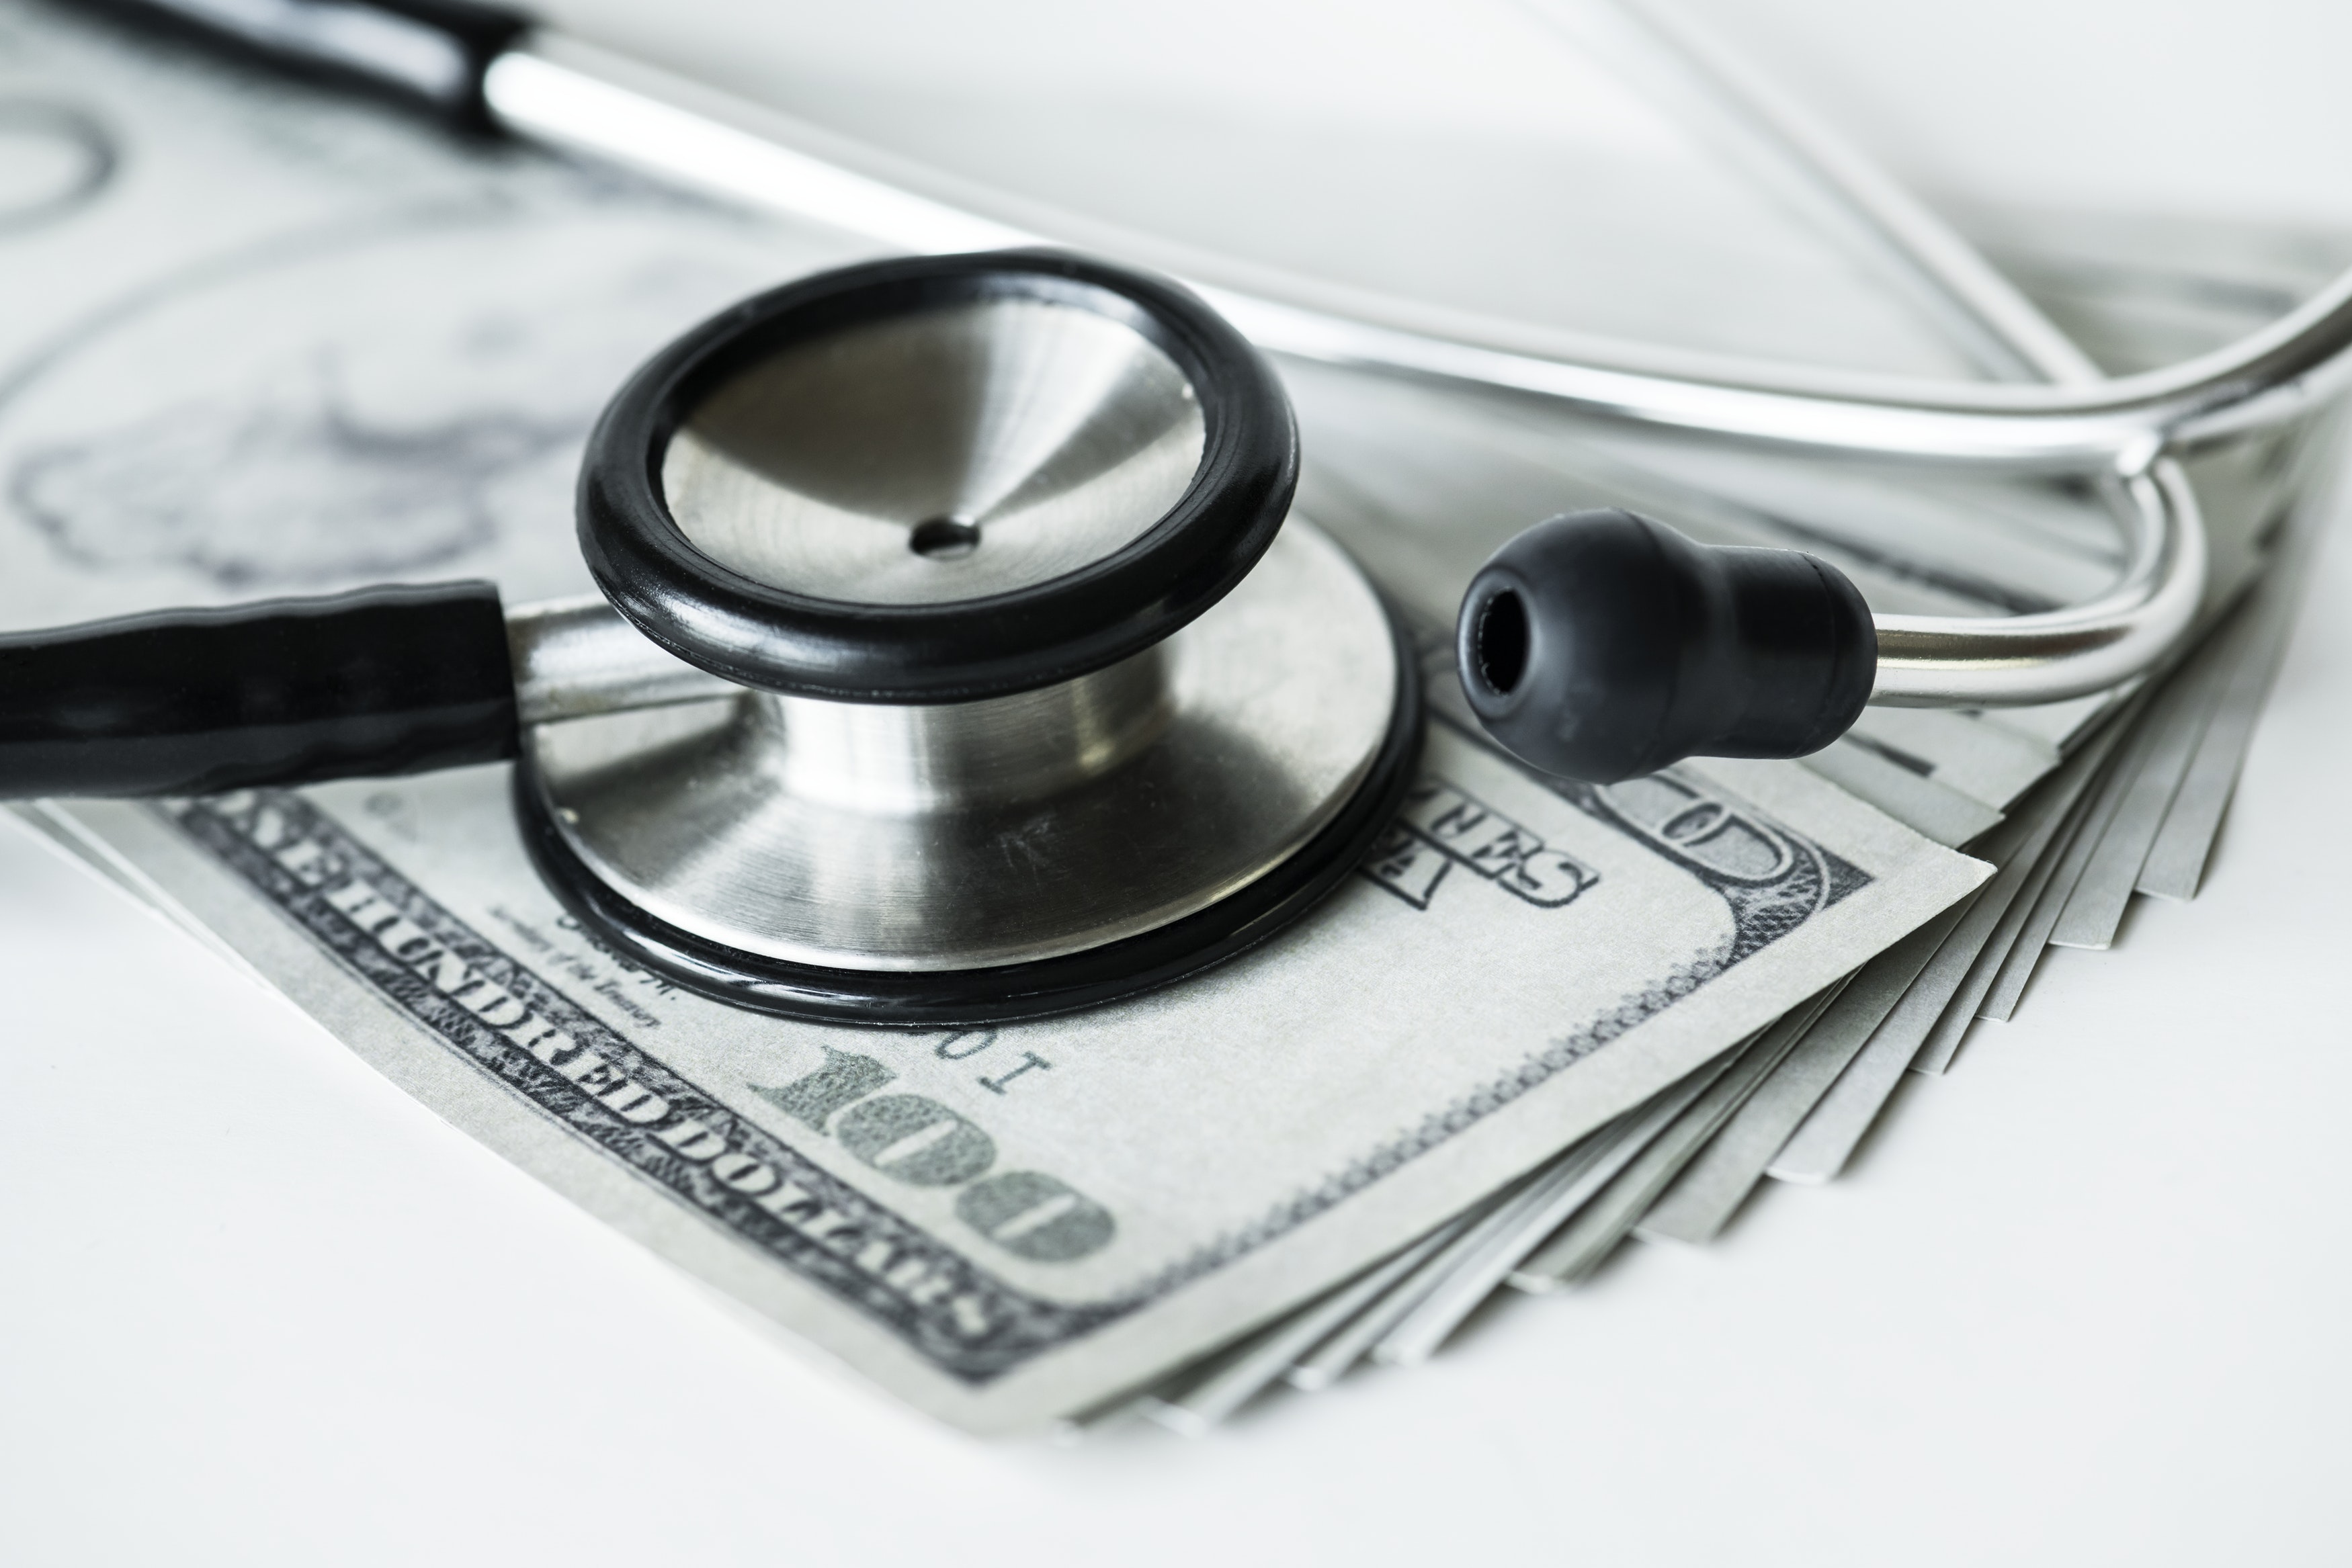 Stethoscope lying on top of pile of money